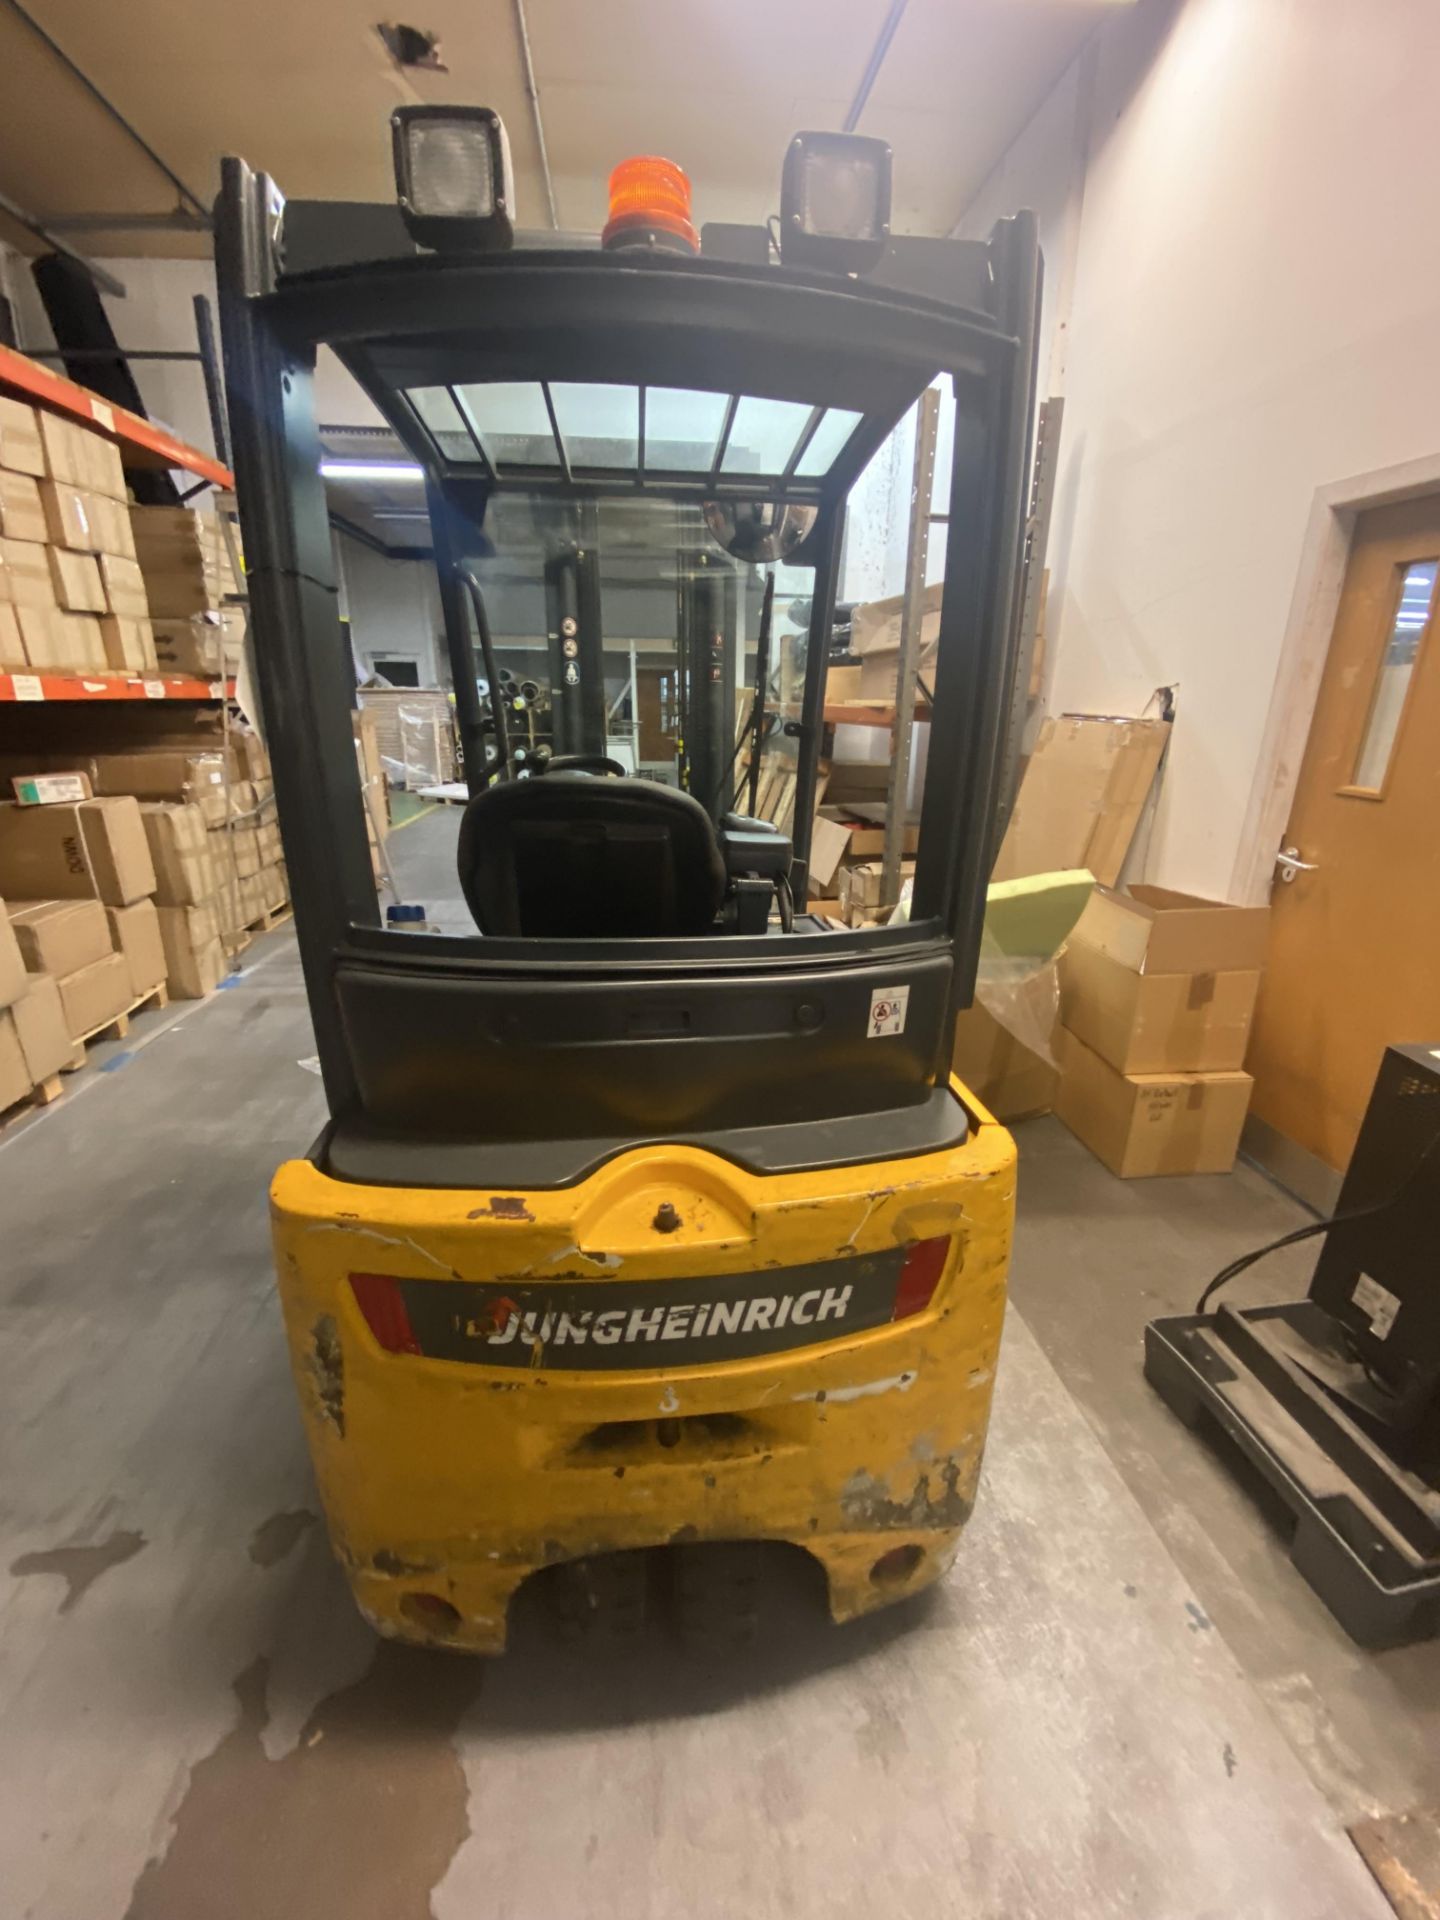 Jungheinrich EFG 216 1600KG CAP. BATTERY ELECTRIC FORK LIFT TRUCK, serial no. FN42413, indicated - Image 3 of 9